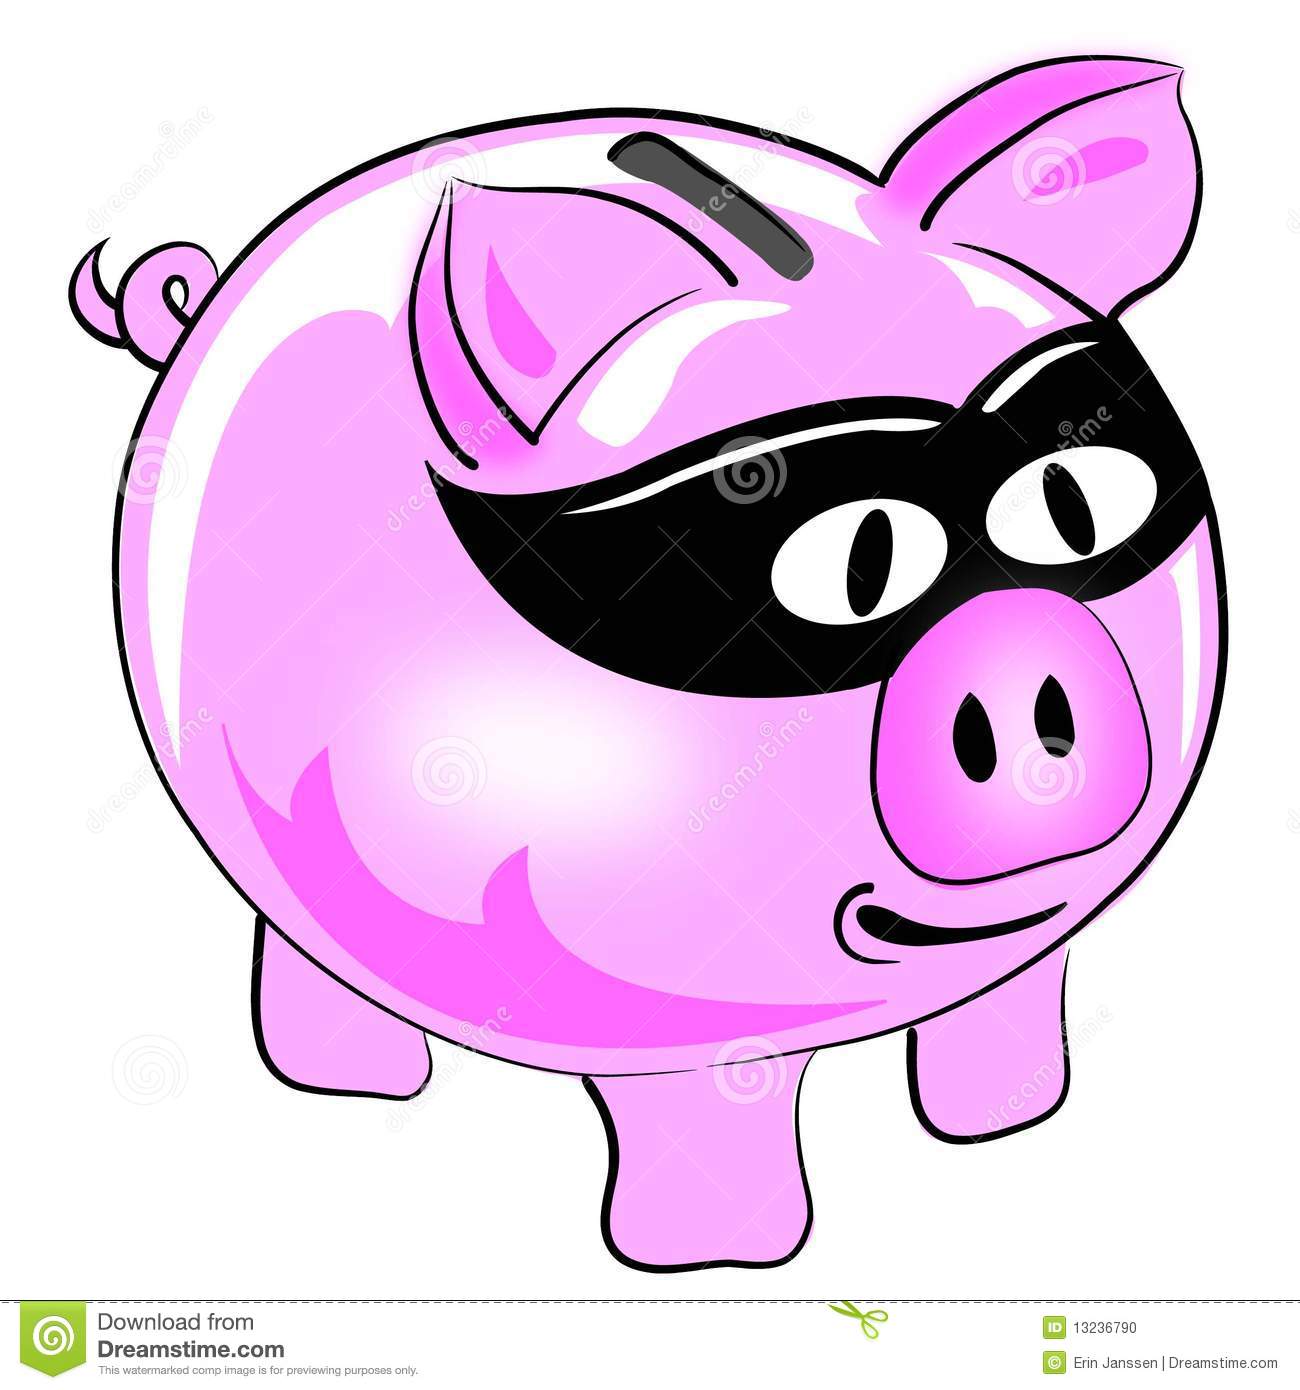 More Similar Stock Images Of   Money Theft Pig